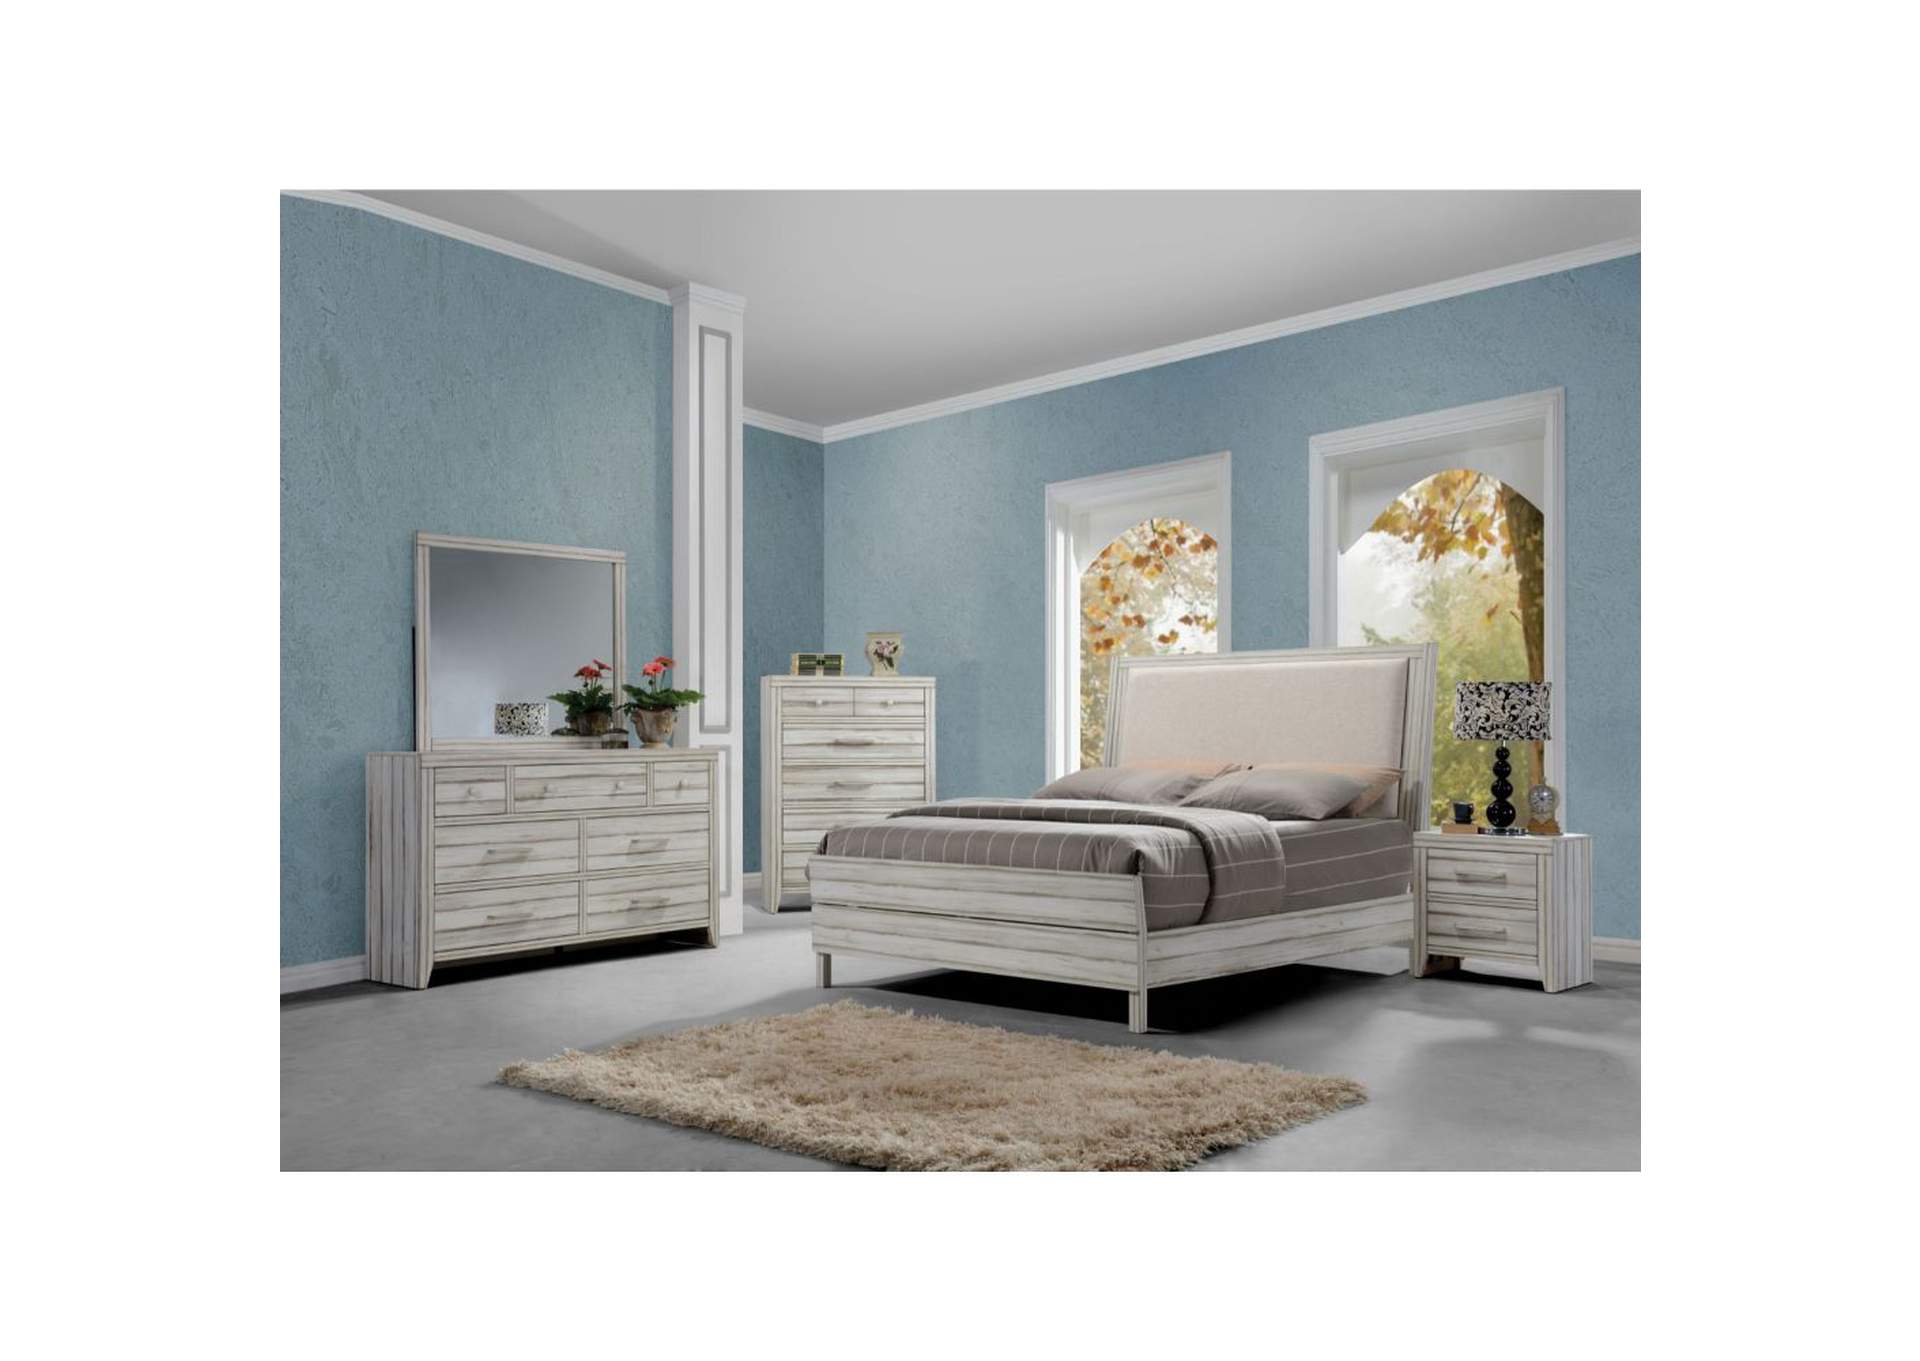 Shayla Eastern King Bed,Acme